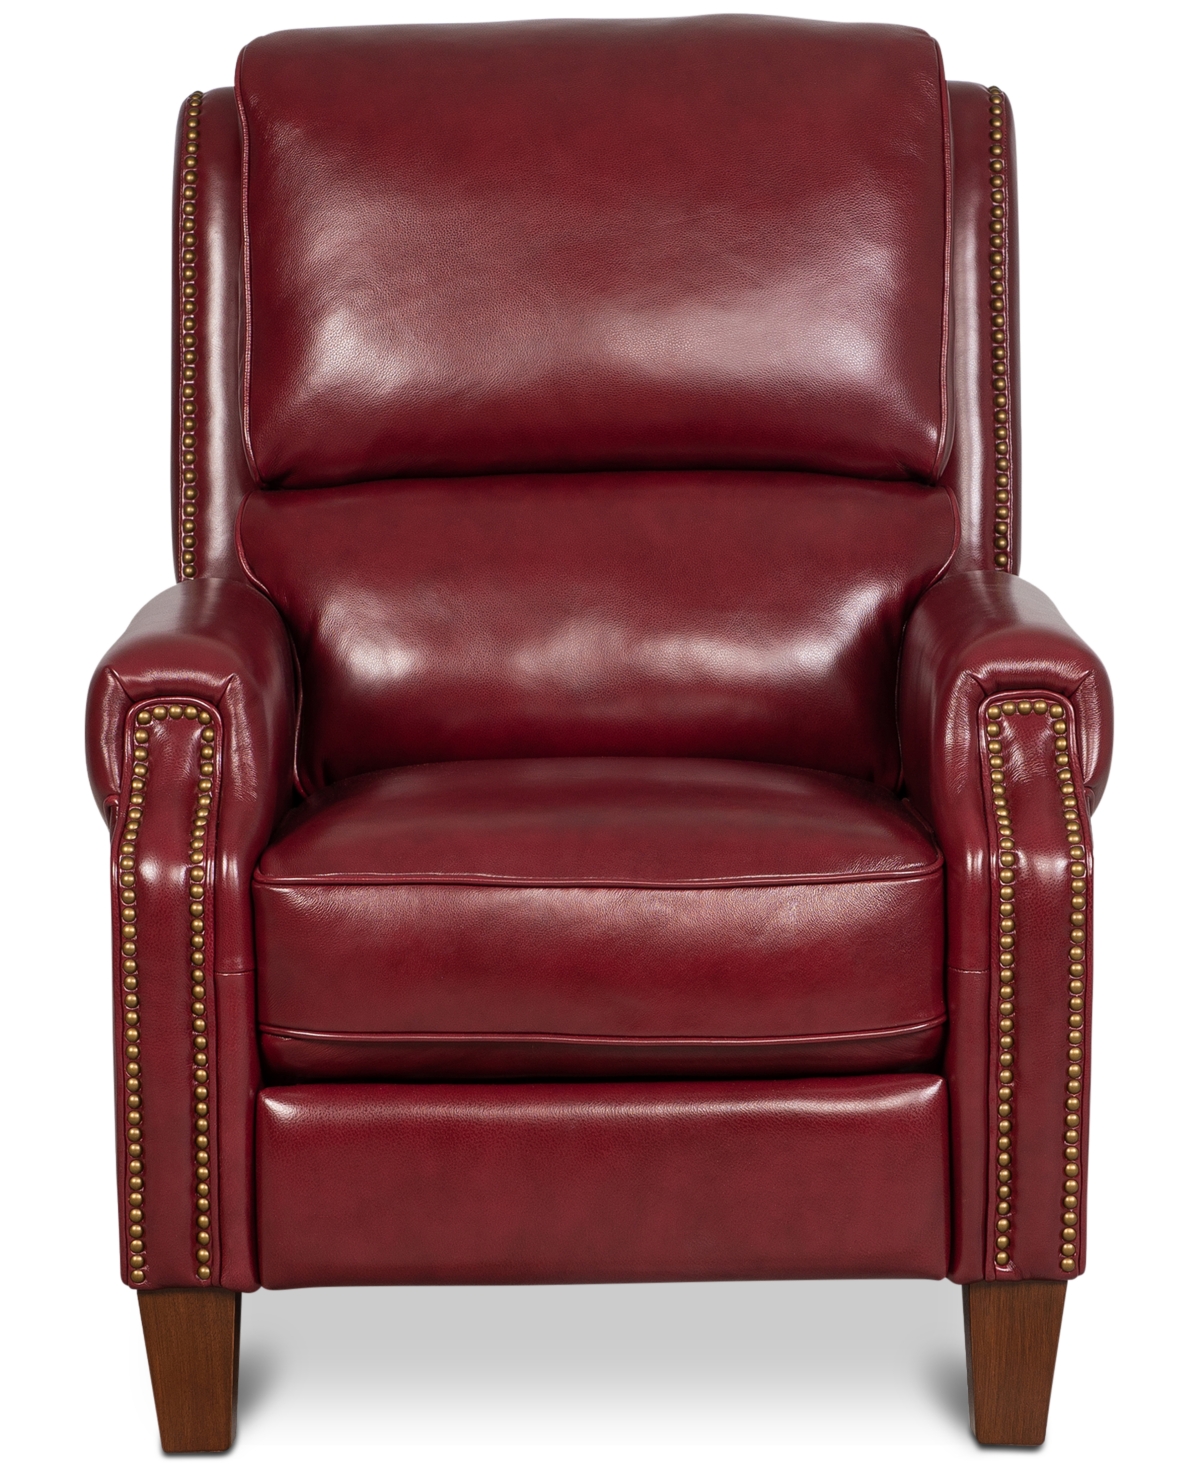 Arianlee Leather Push Back Recliner, Created for Macys